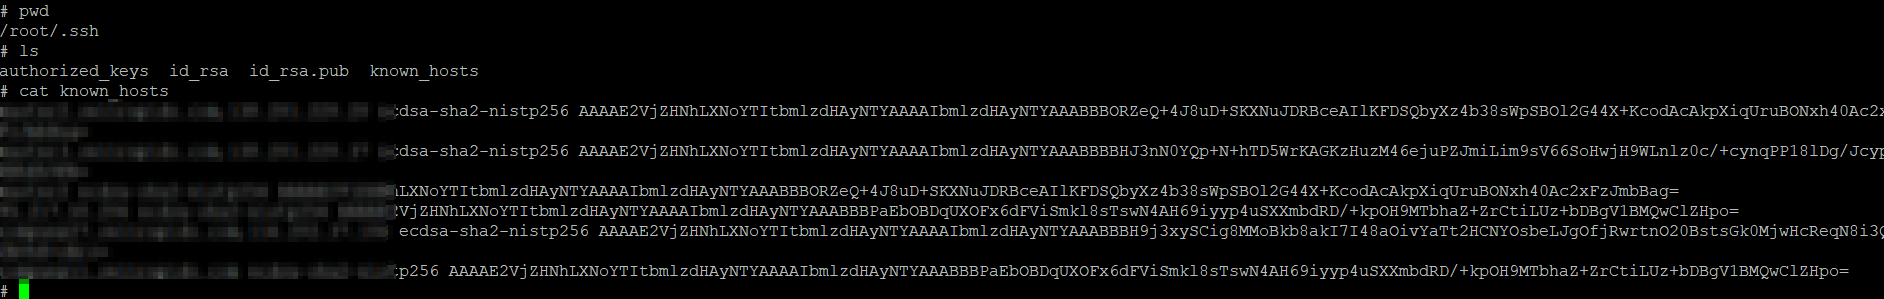 contents of /root/.ssh, found id_rsa private key and contents of known_hosts.